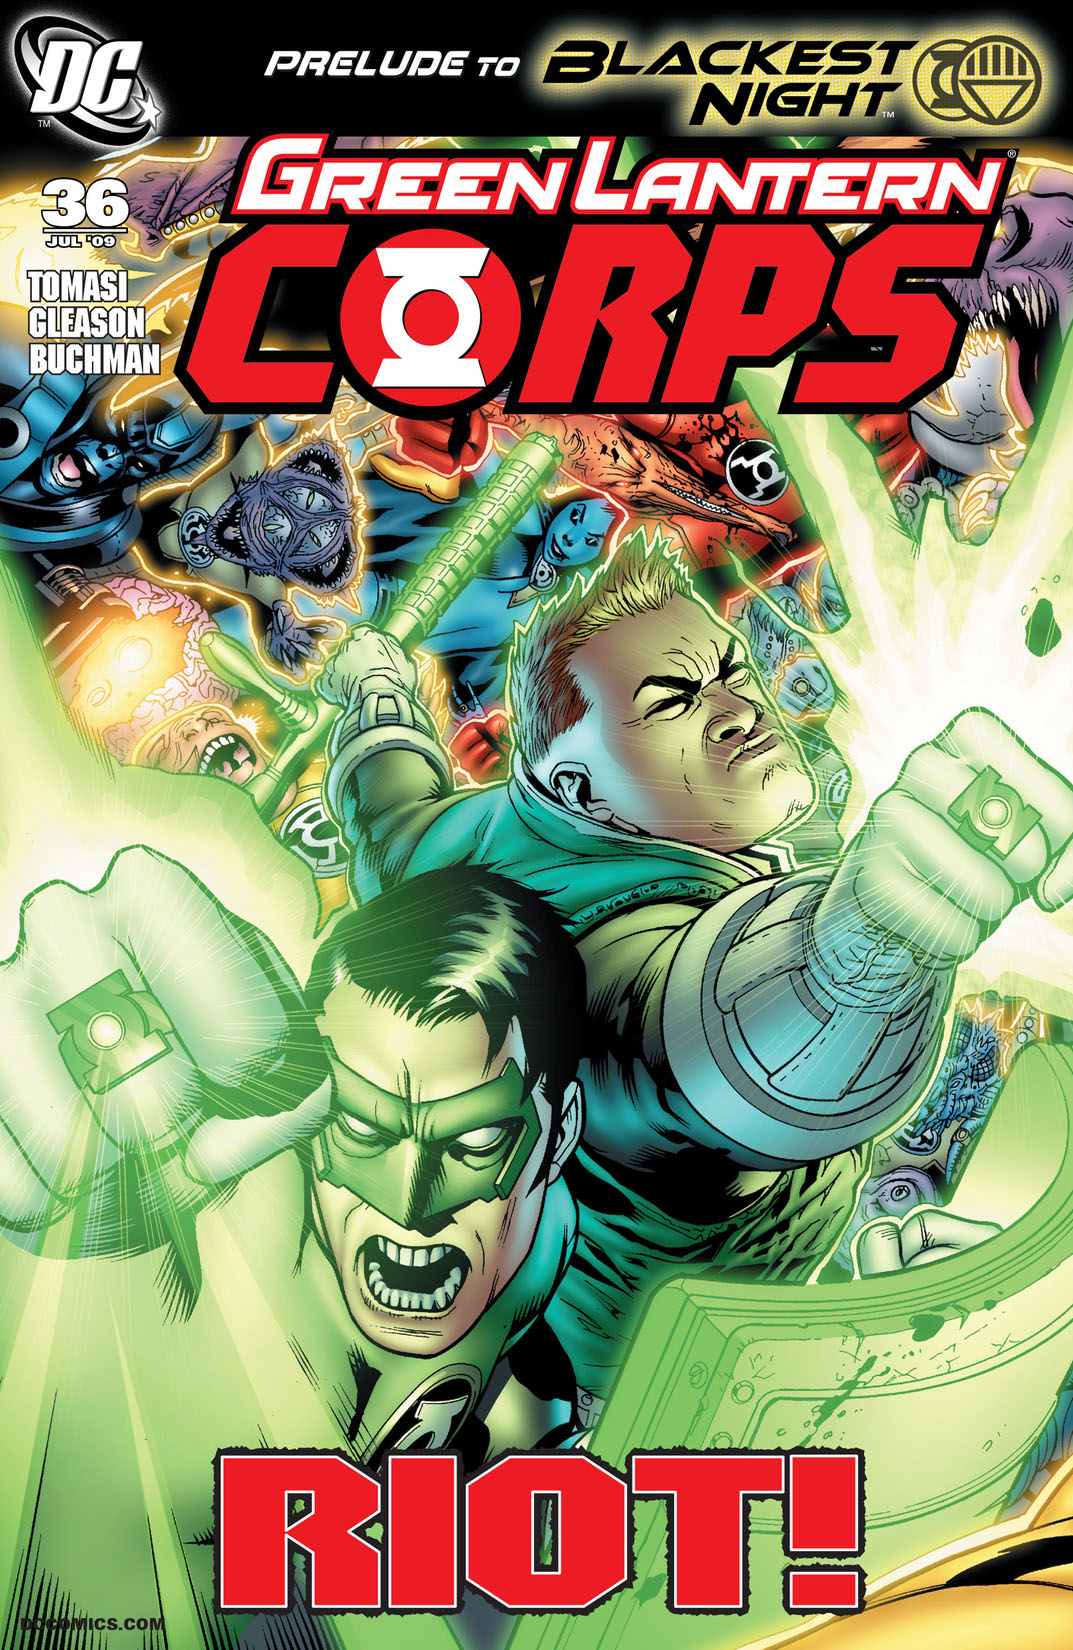 Green Lantern Corps (2006-) #36 preview images